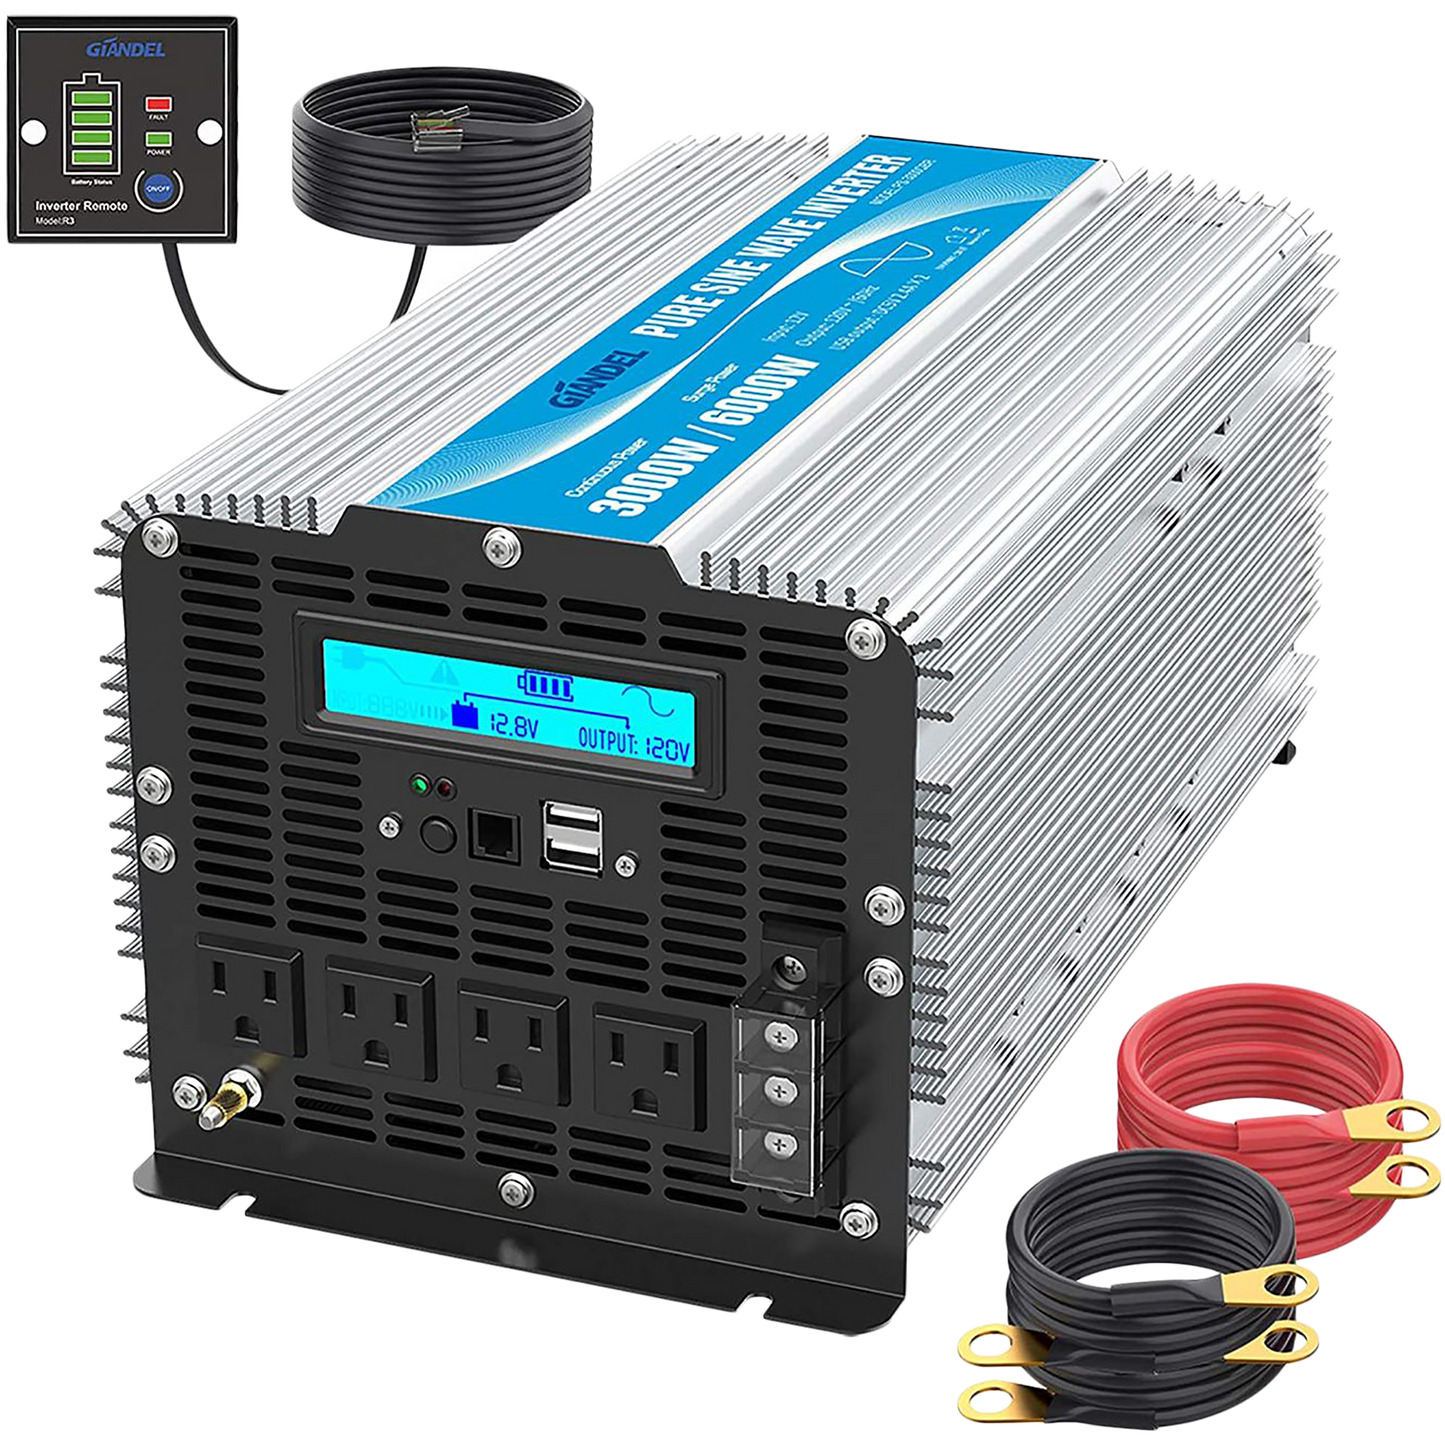 Giandel Pure Sine Wave Power Inverter 3000 Watt DC 12 Volt to 120 Volt  with LCD Display and Remote Control 2X 2.4A USB and 4X AC Outlets